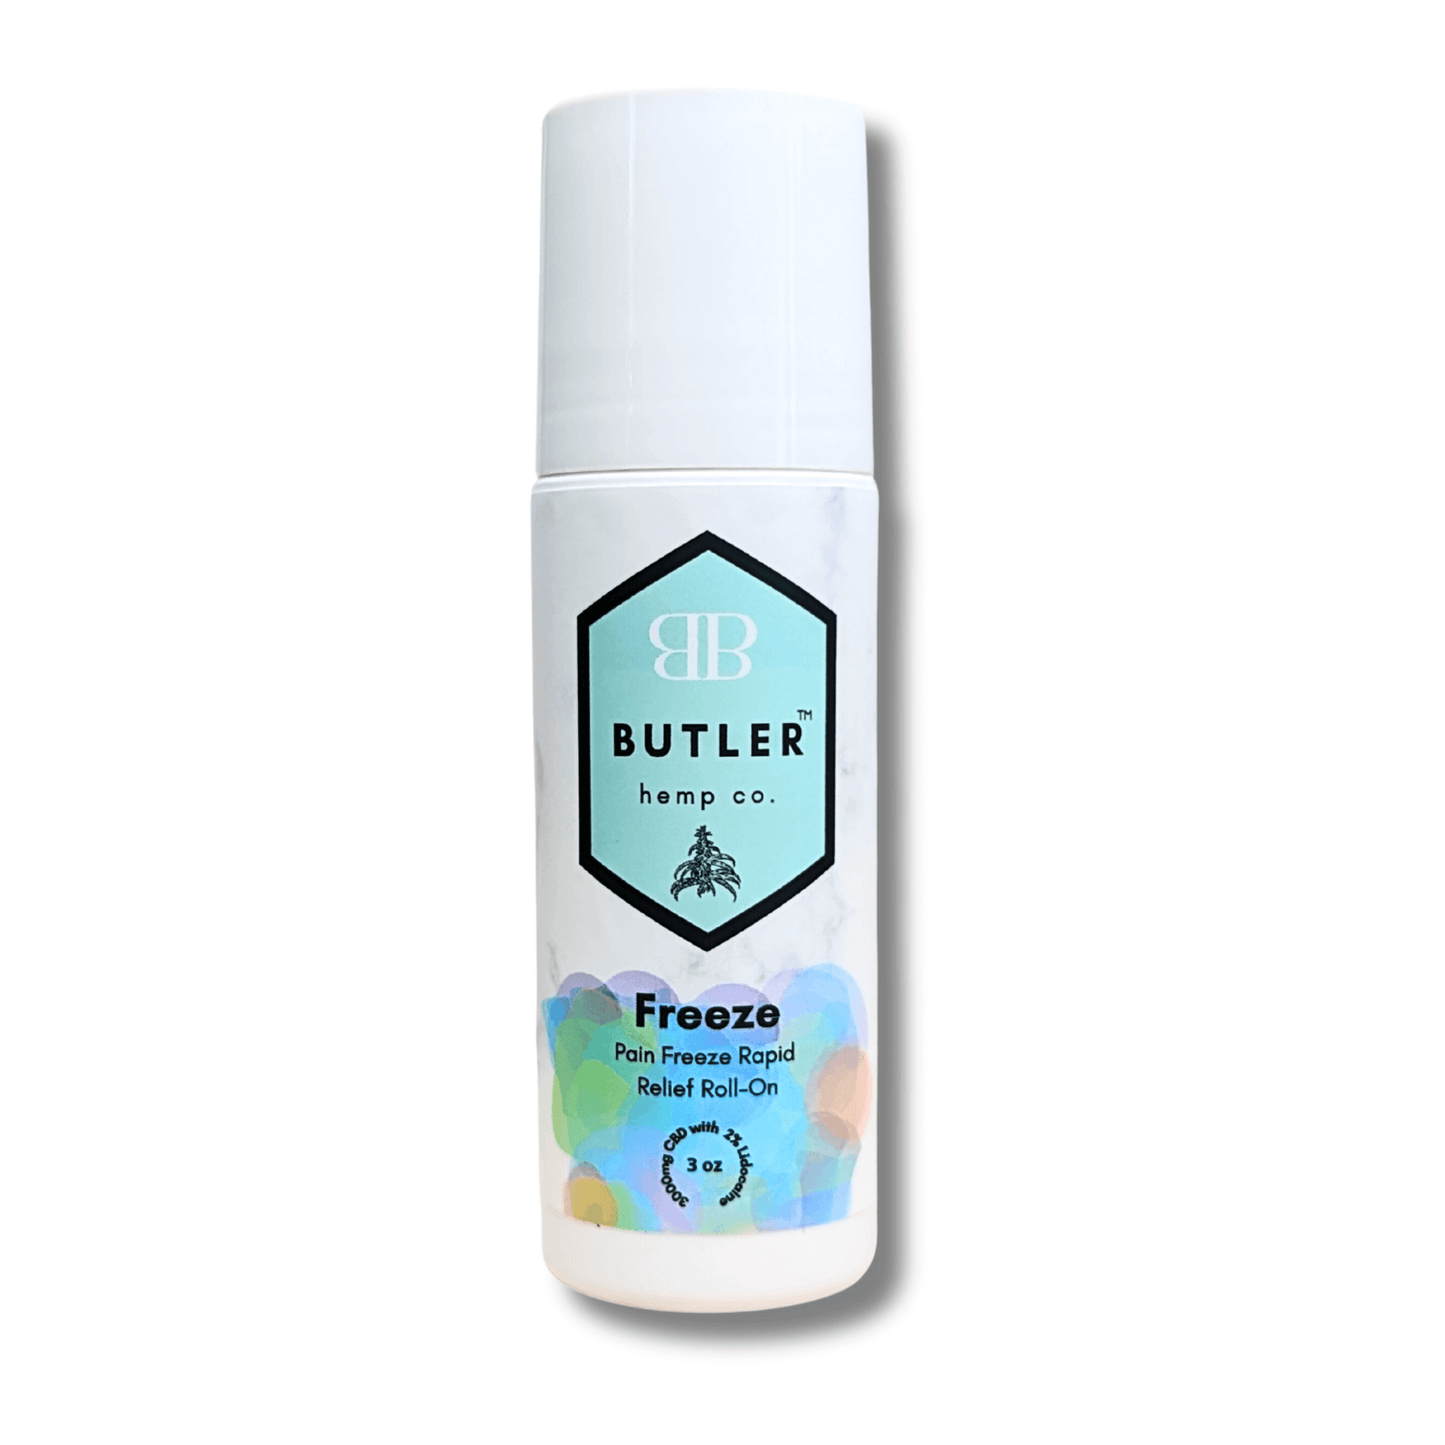 Butler Freeze Rapid Relief Roll-On fights pain with an immediate cooling blast from the menthol, surface-level relief from the lidocaine, and deeper, anti-inflammatory action from the CBD.